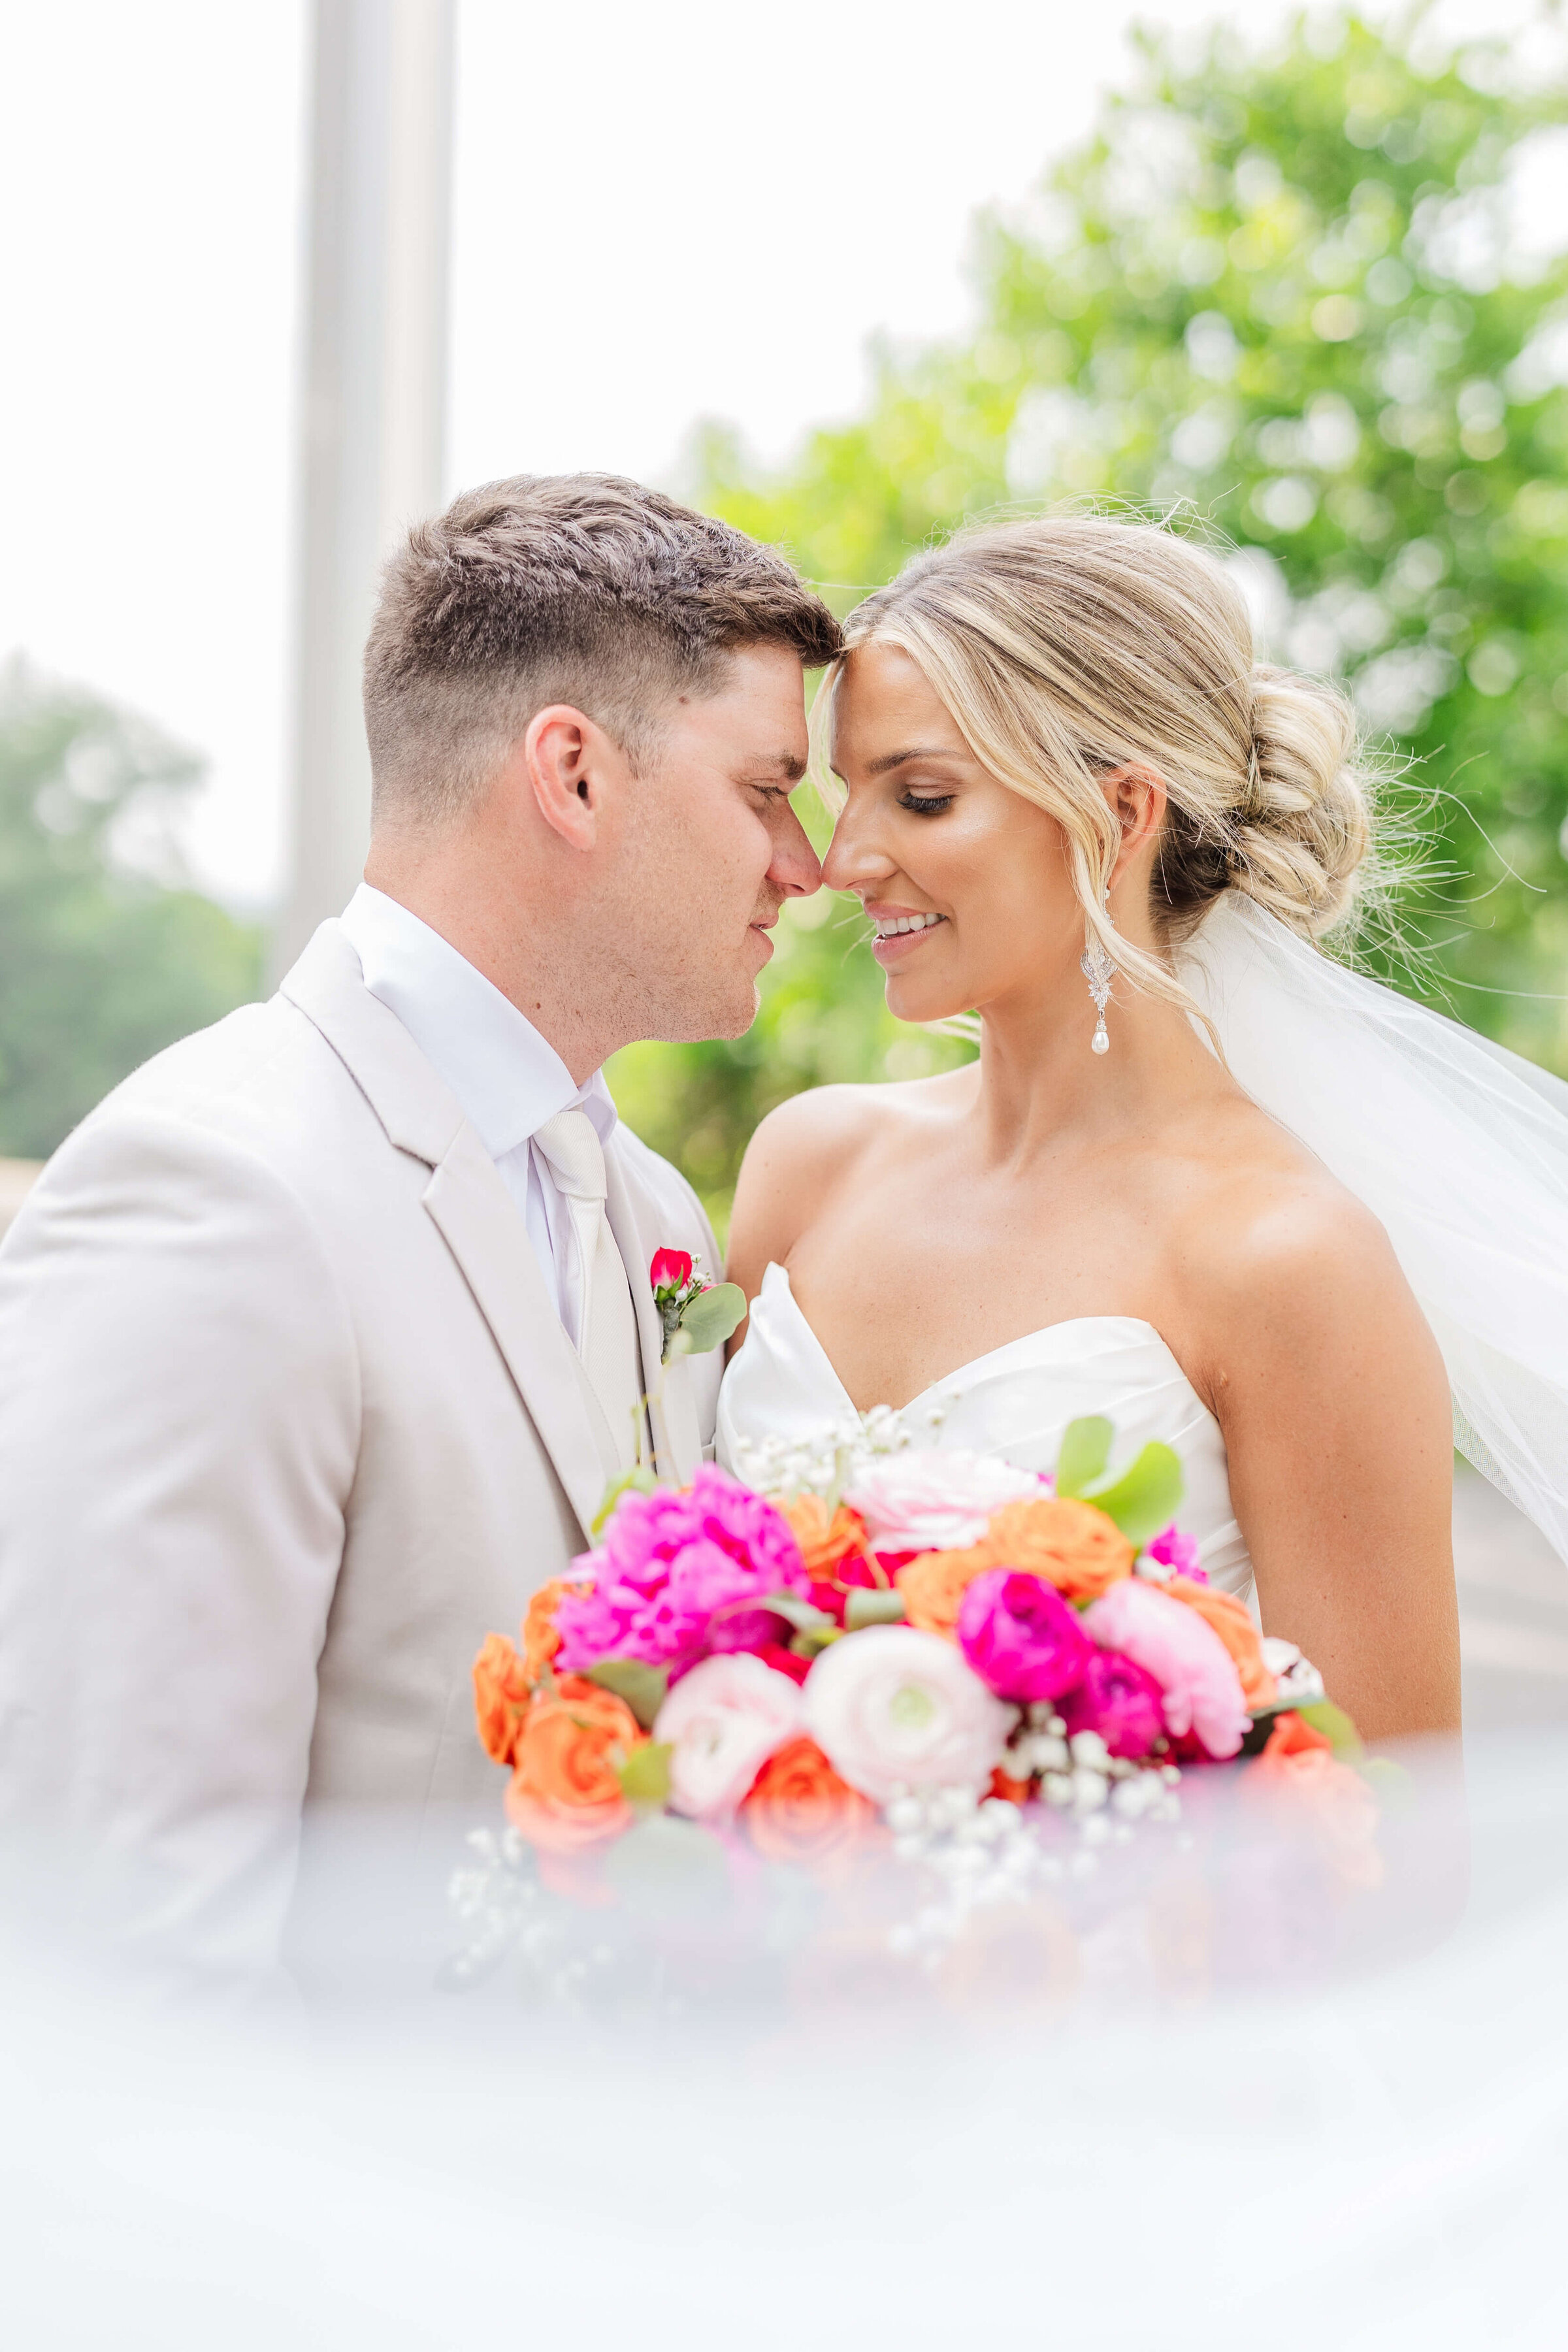 A bride and groom stand facing each other smiling. The groom is wearing a tan suit and the bride is holding a bright pink bouquet. It's summer, and the trees are bright green in the back of them.